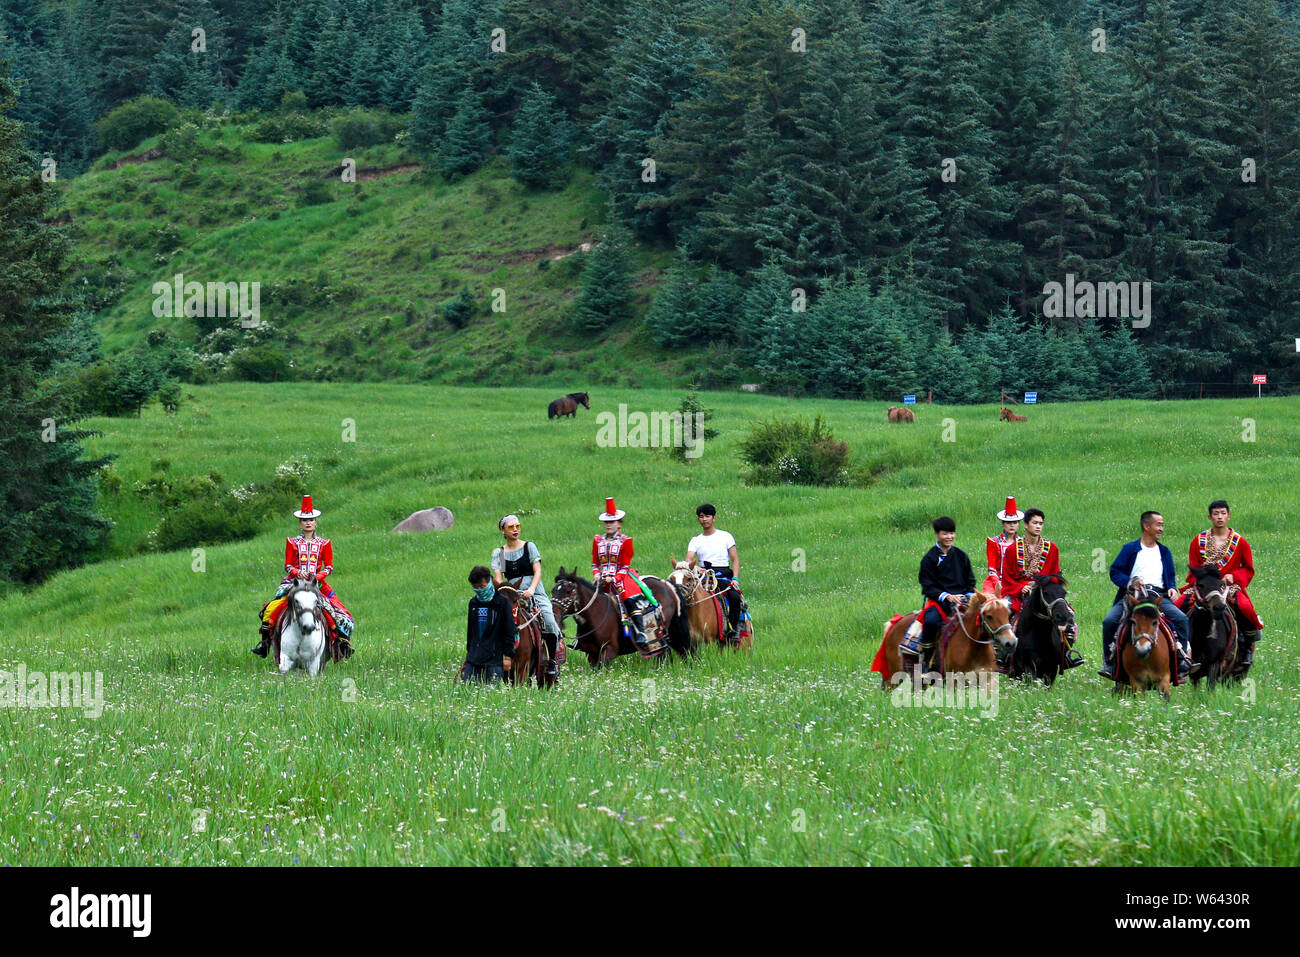 Gansu, China. 22nd July, 2019. In summer, horseshoe Tibetan township, Yugu autonomous county, Sunan county, Gansu province, the grassland is covered with green grass and the original forests overlap with the snow-capped Qilian mountains, attracting visitors to linger on the picturesque scenery.(photo taken on July 22, 2019) Credit: SIPA Asia/ZUMA Wire/Alamy Live News Stock Photo